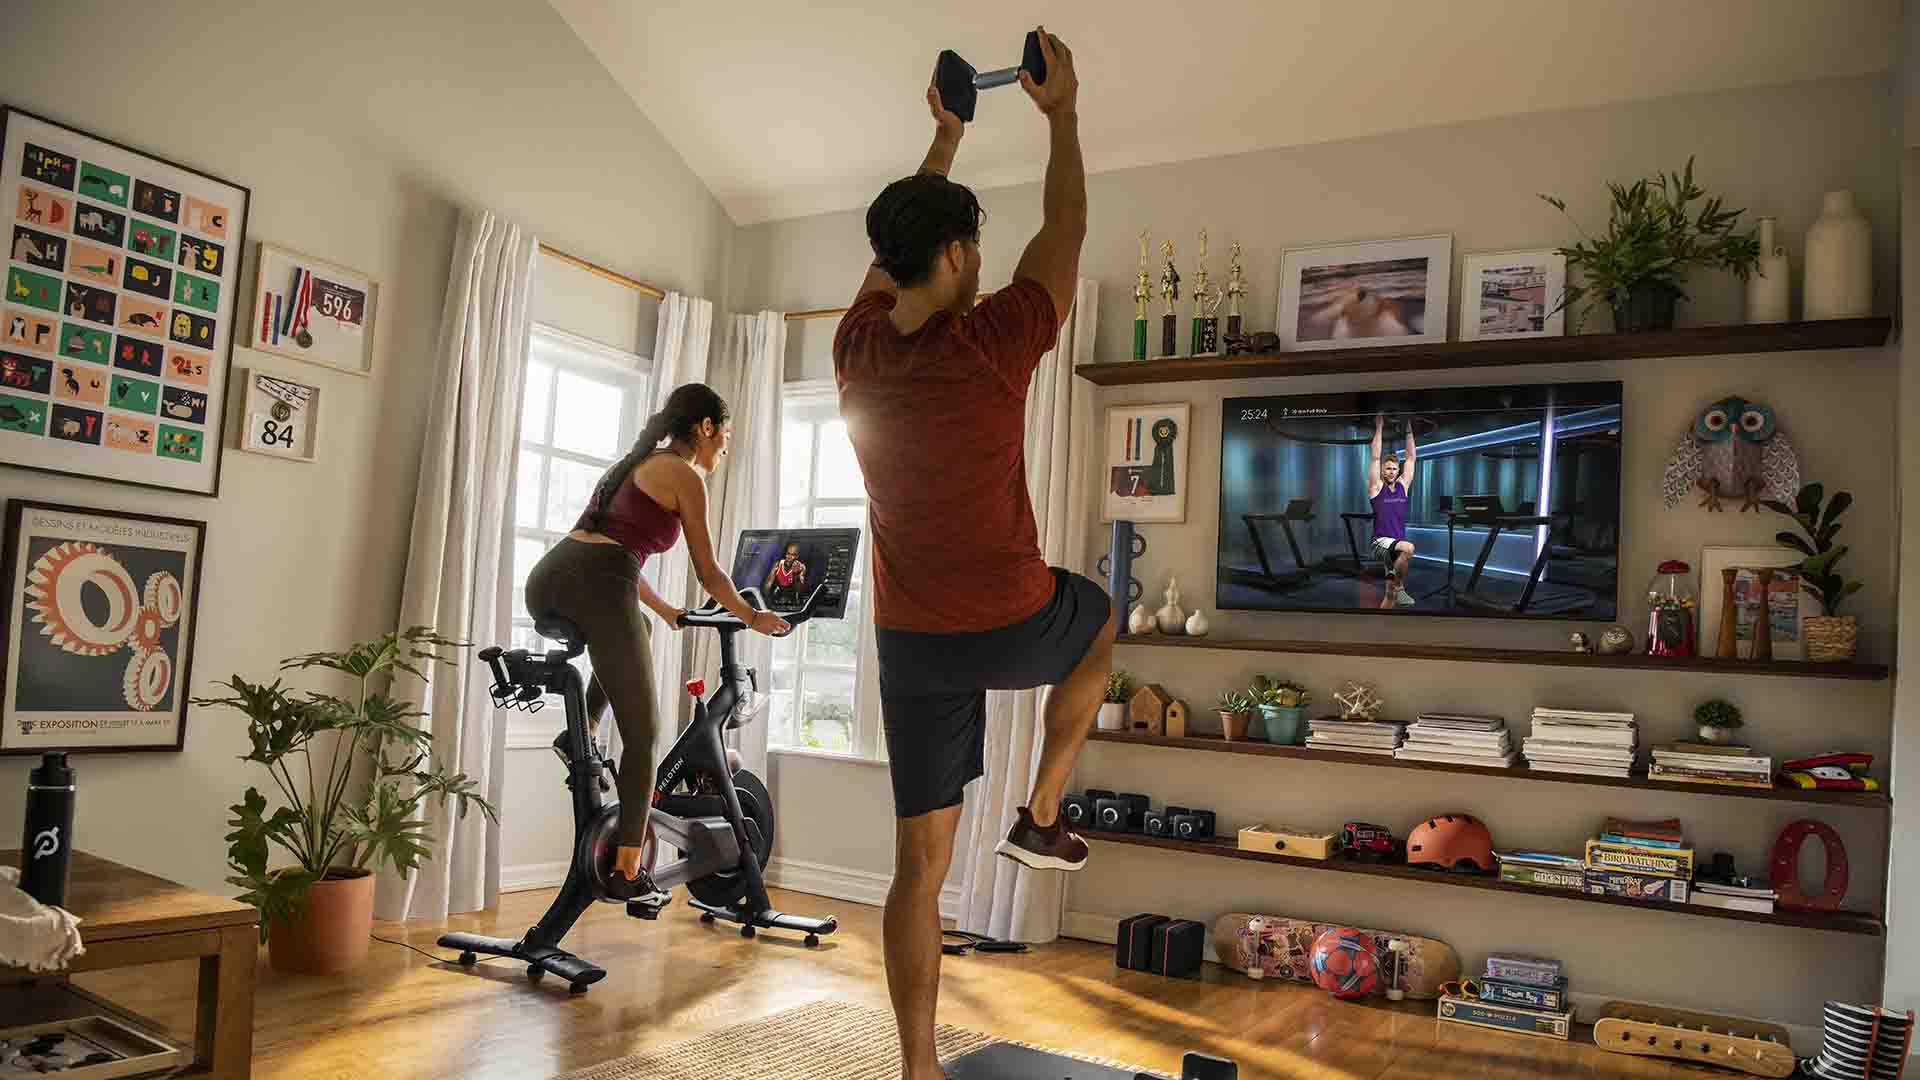 Peloton Is Rolling Out Its High-End Fitness Equipment and Streamed Classes to Australia